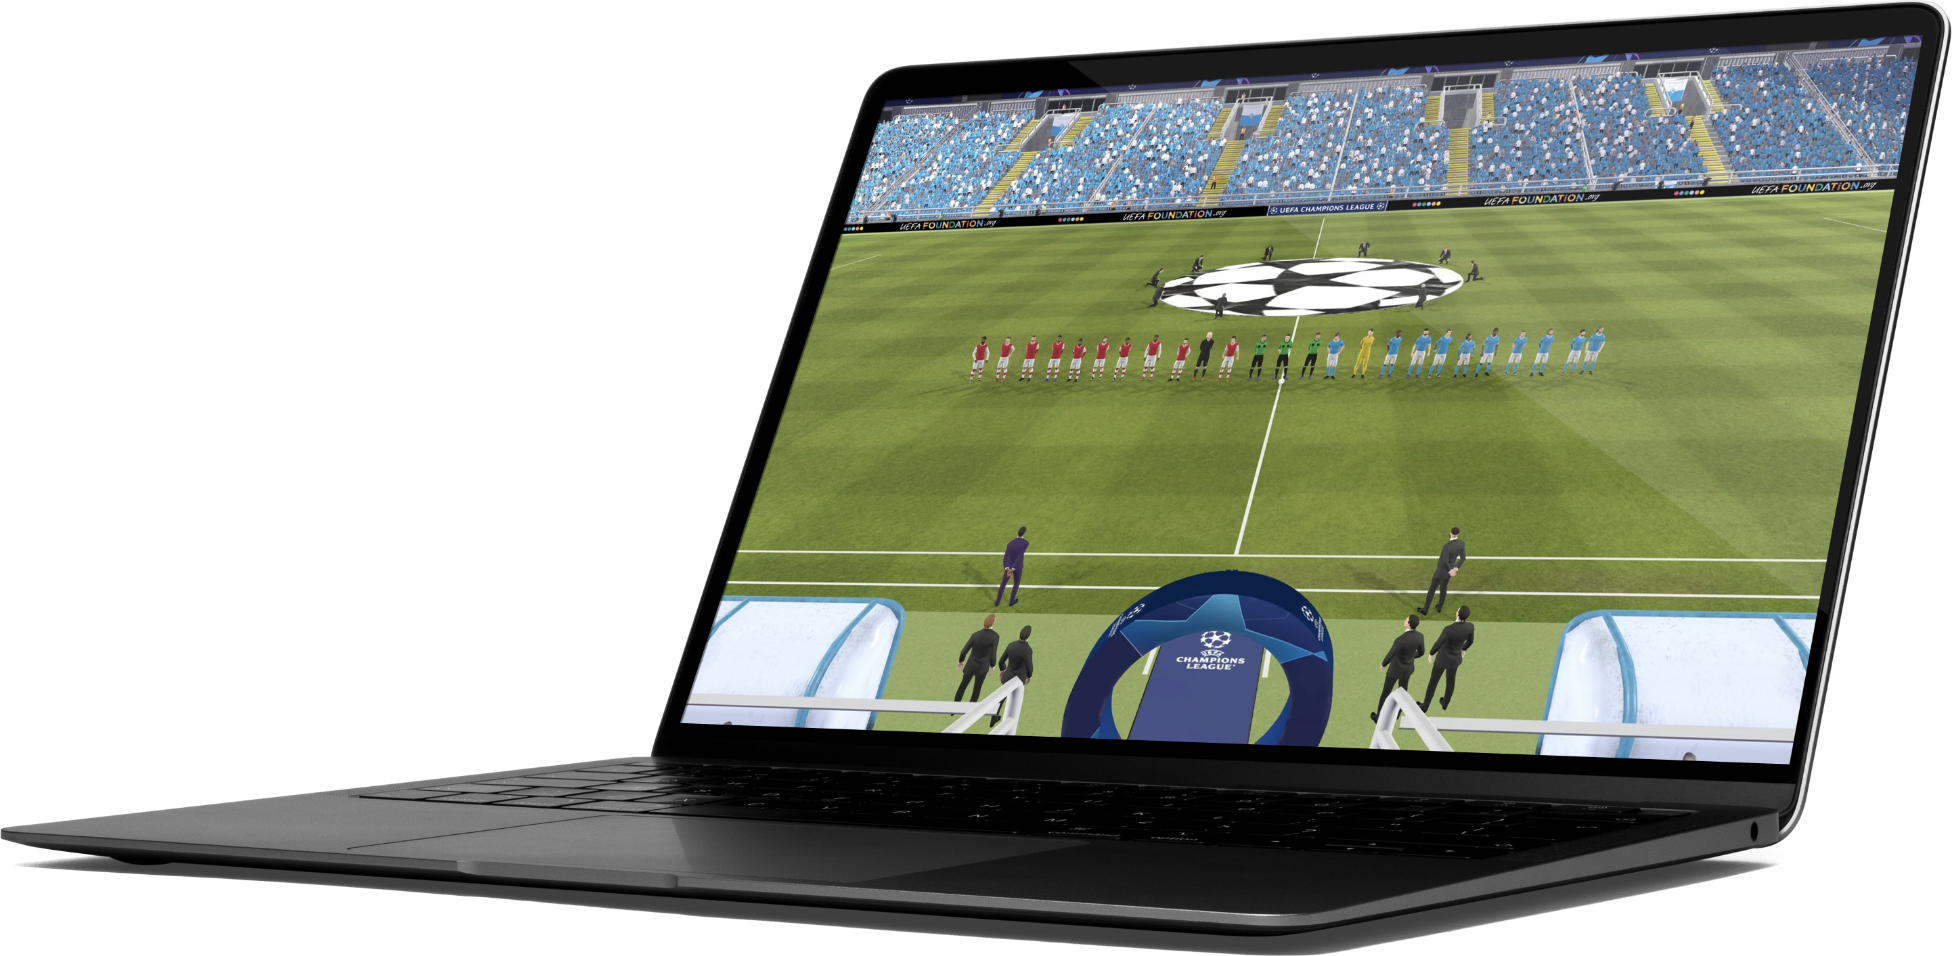 What happened to Football Manager 2022 Touch for iPad? - Dexerto